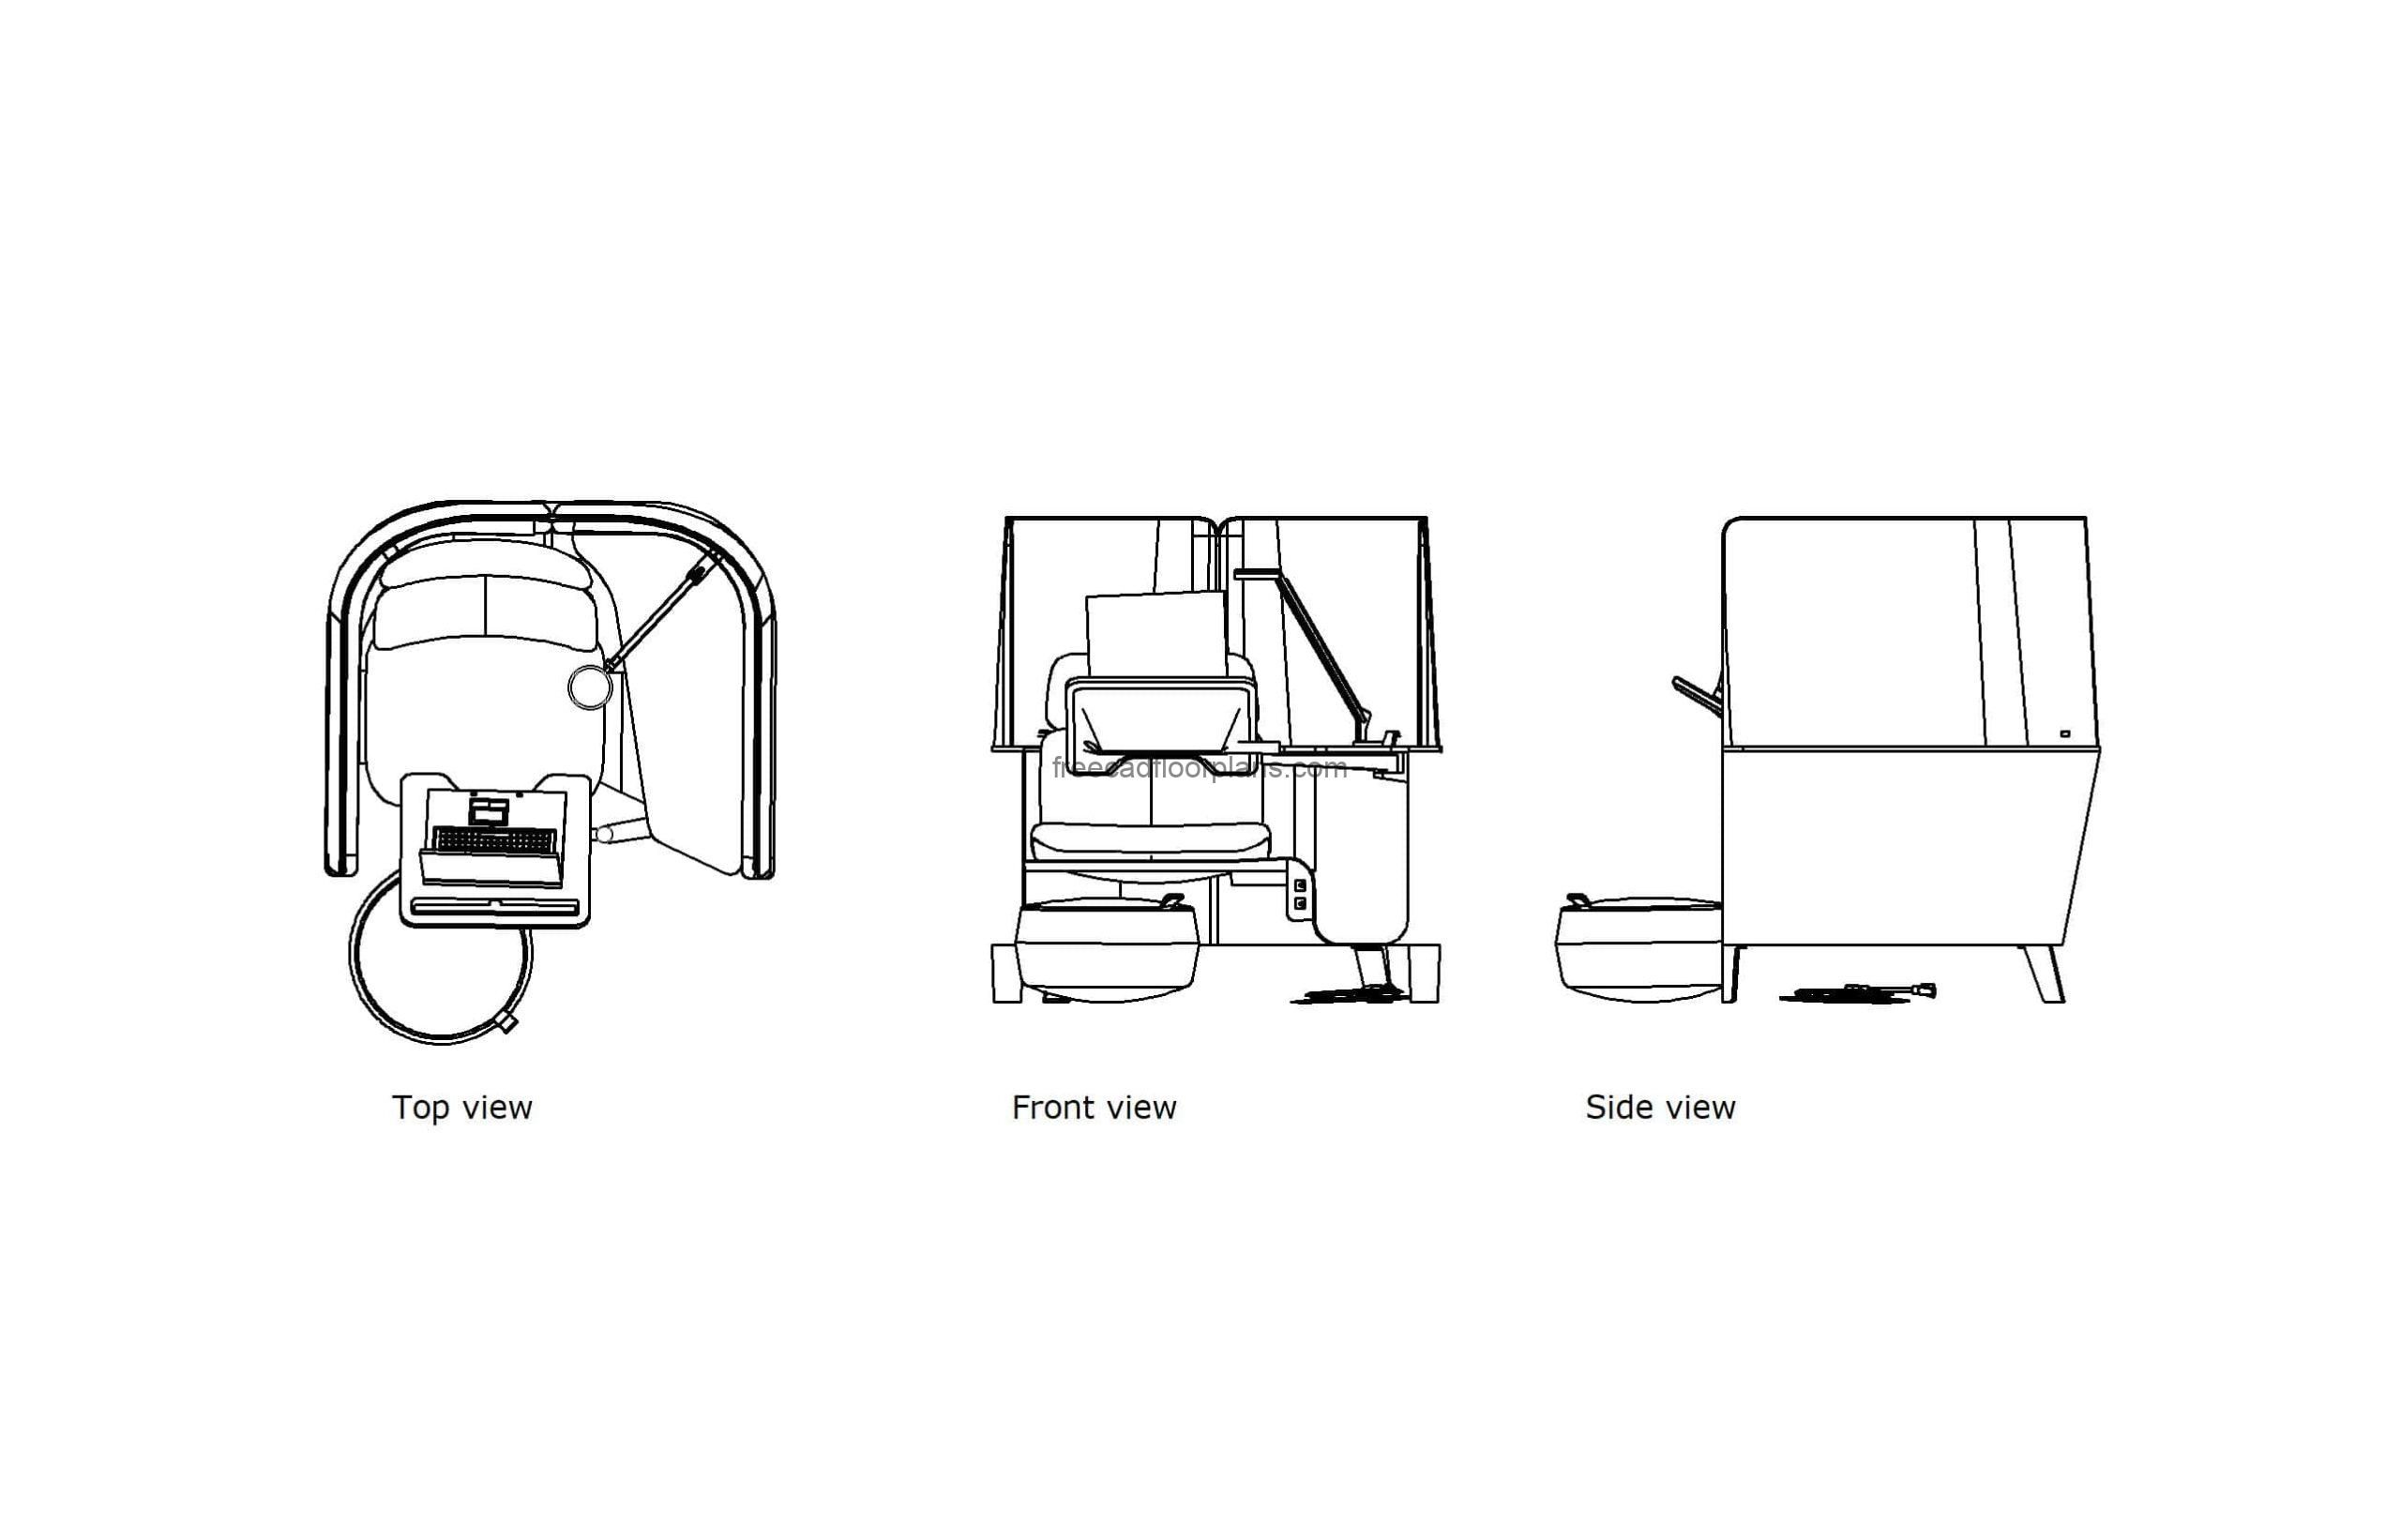 steelcase brody autocad drawing, 2d views with plan and elevation, dwg file free for download